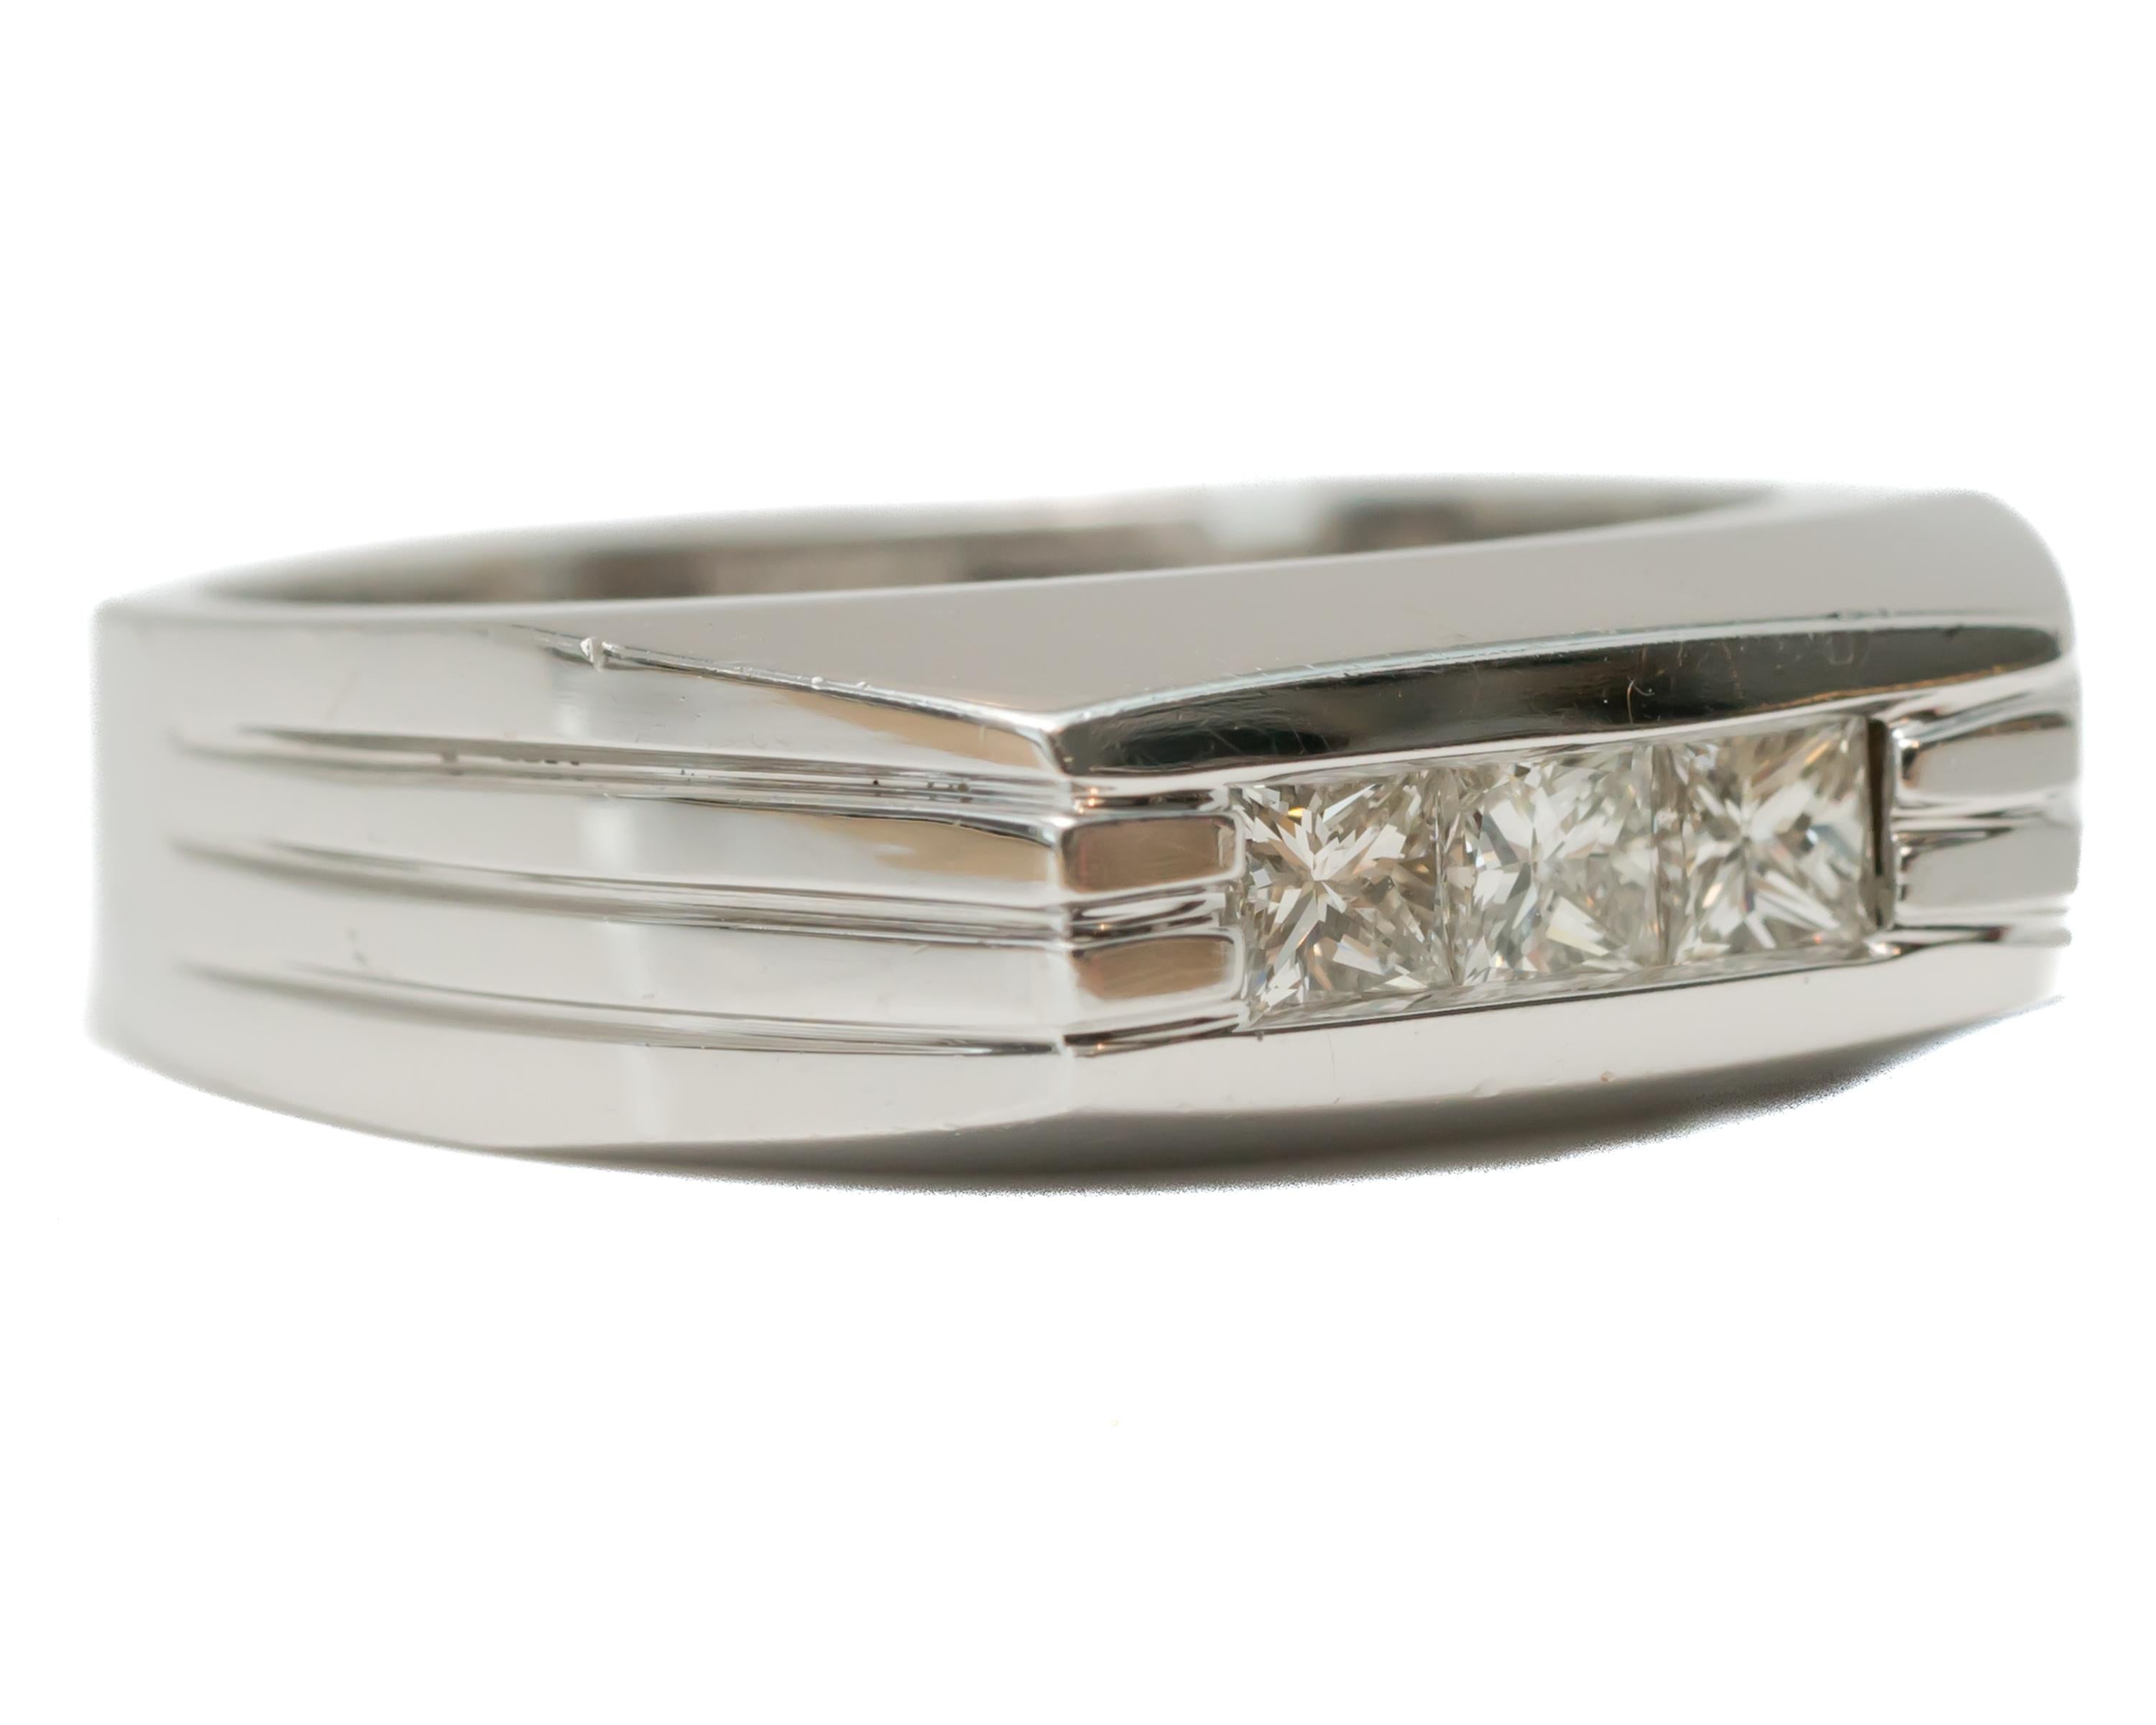 1950s Retro Diamond Band Ring - 14 Karat White Gold, Diamonds

Features:
0.35 carats Princess cut Diamonds
3 Channel set Diamonds
14 Karat White Gold Setting
Sleek, Modern Design
Band Width tapers from 7 - 4.75 millimeters
Finger to top of ring